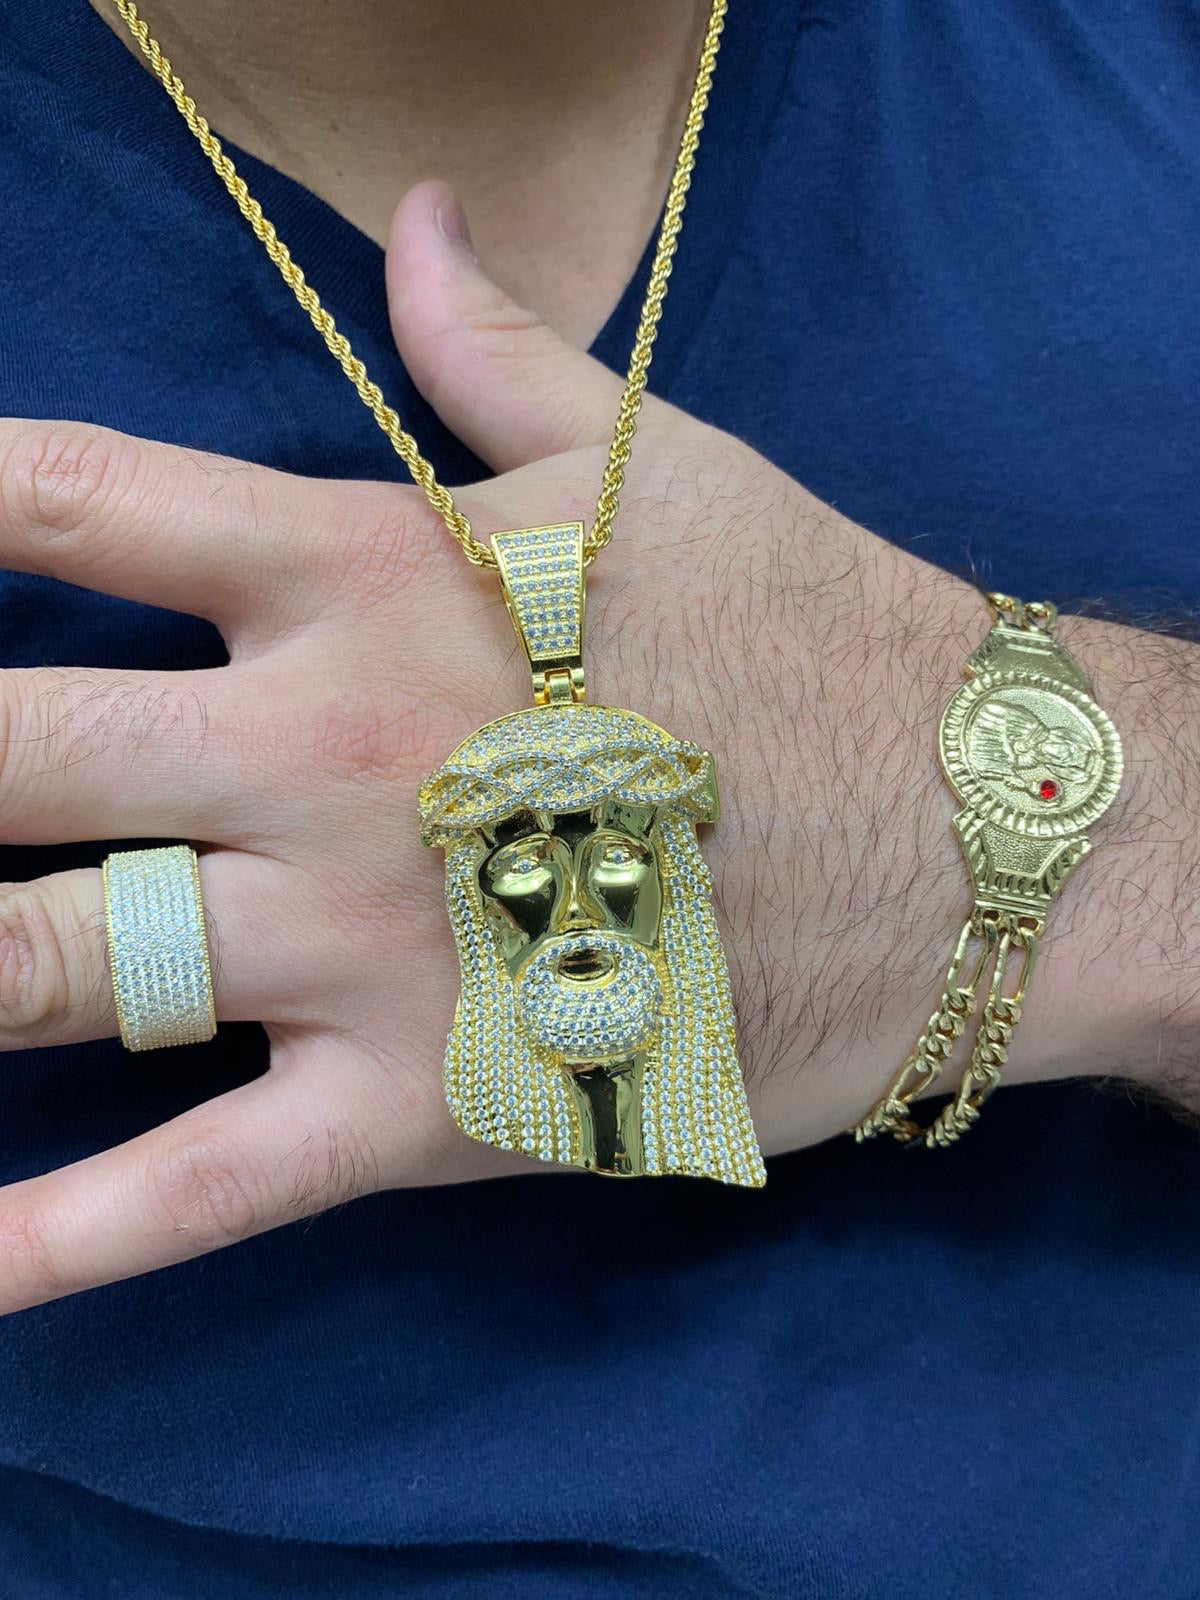 Jesus piece and chain